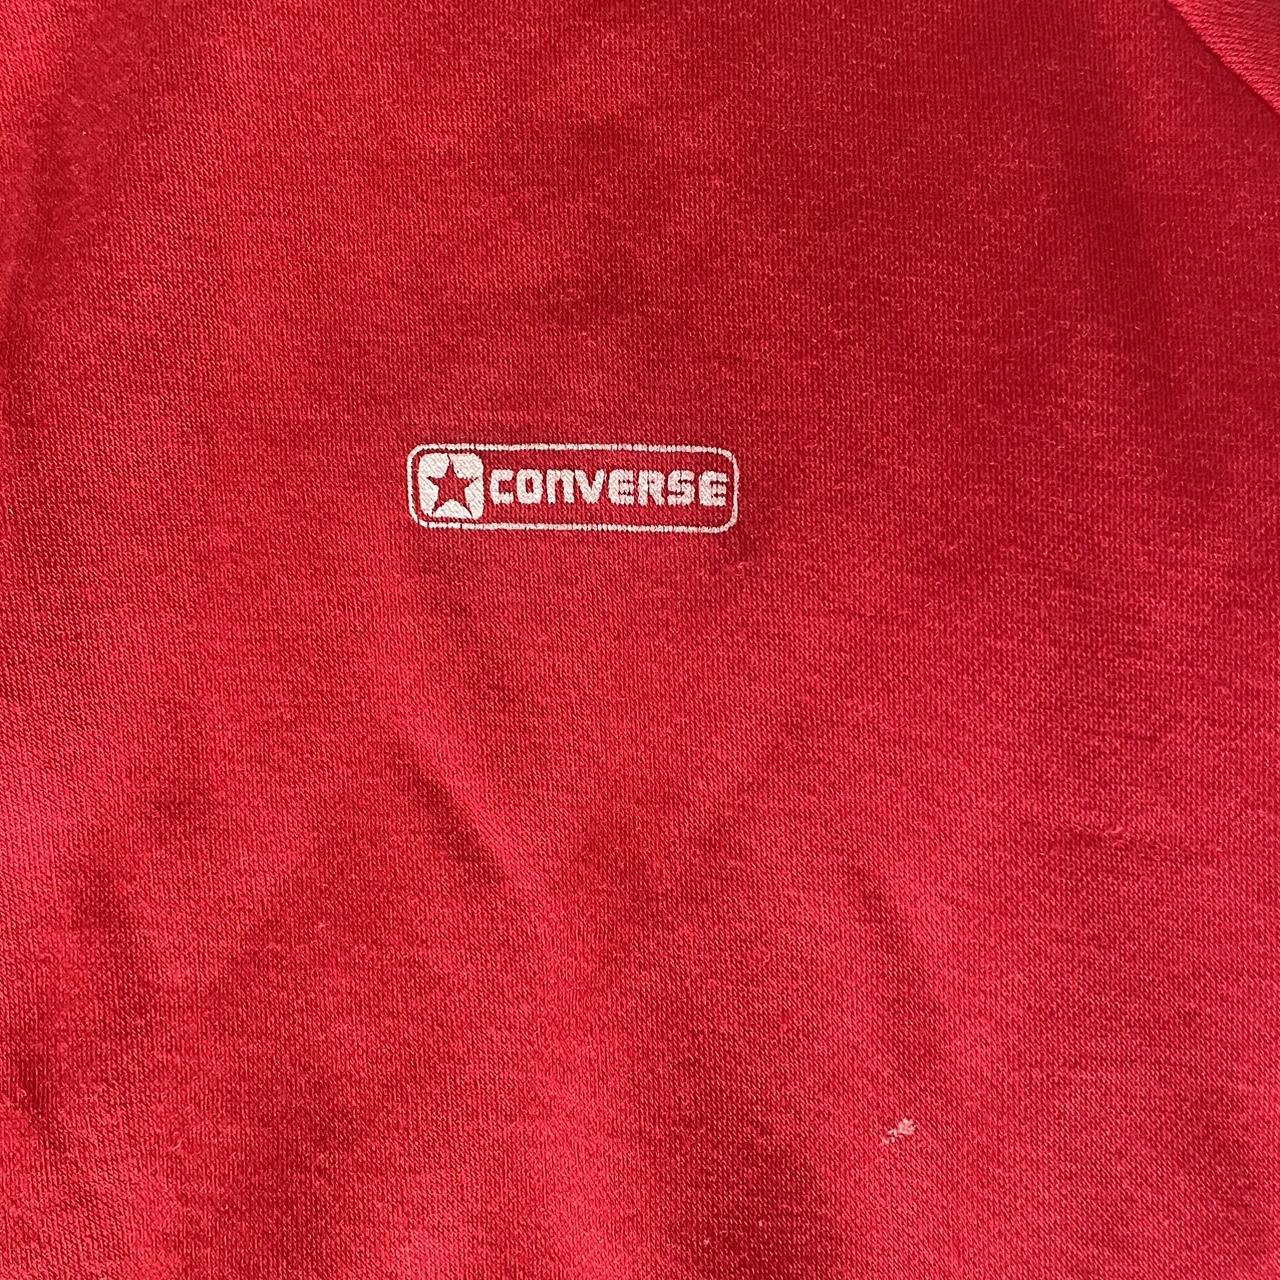 Converse Men's Red and Navy Jumper (2)